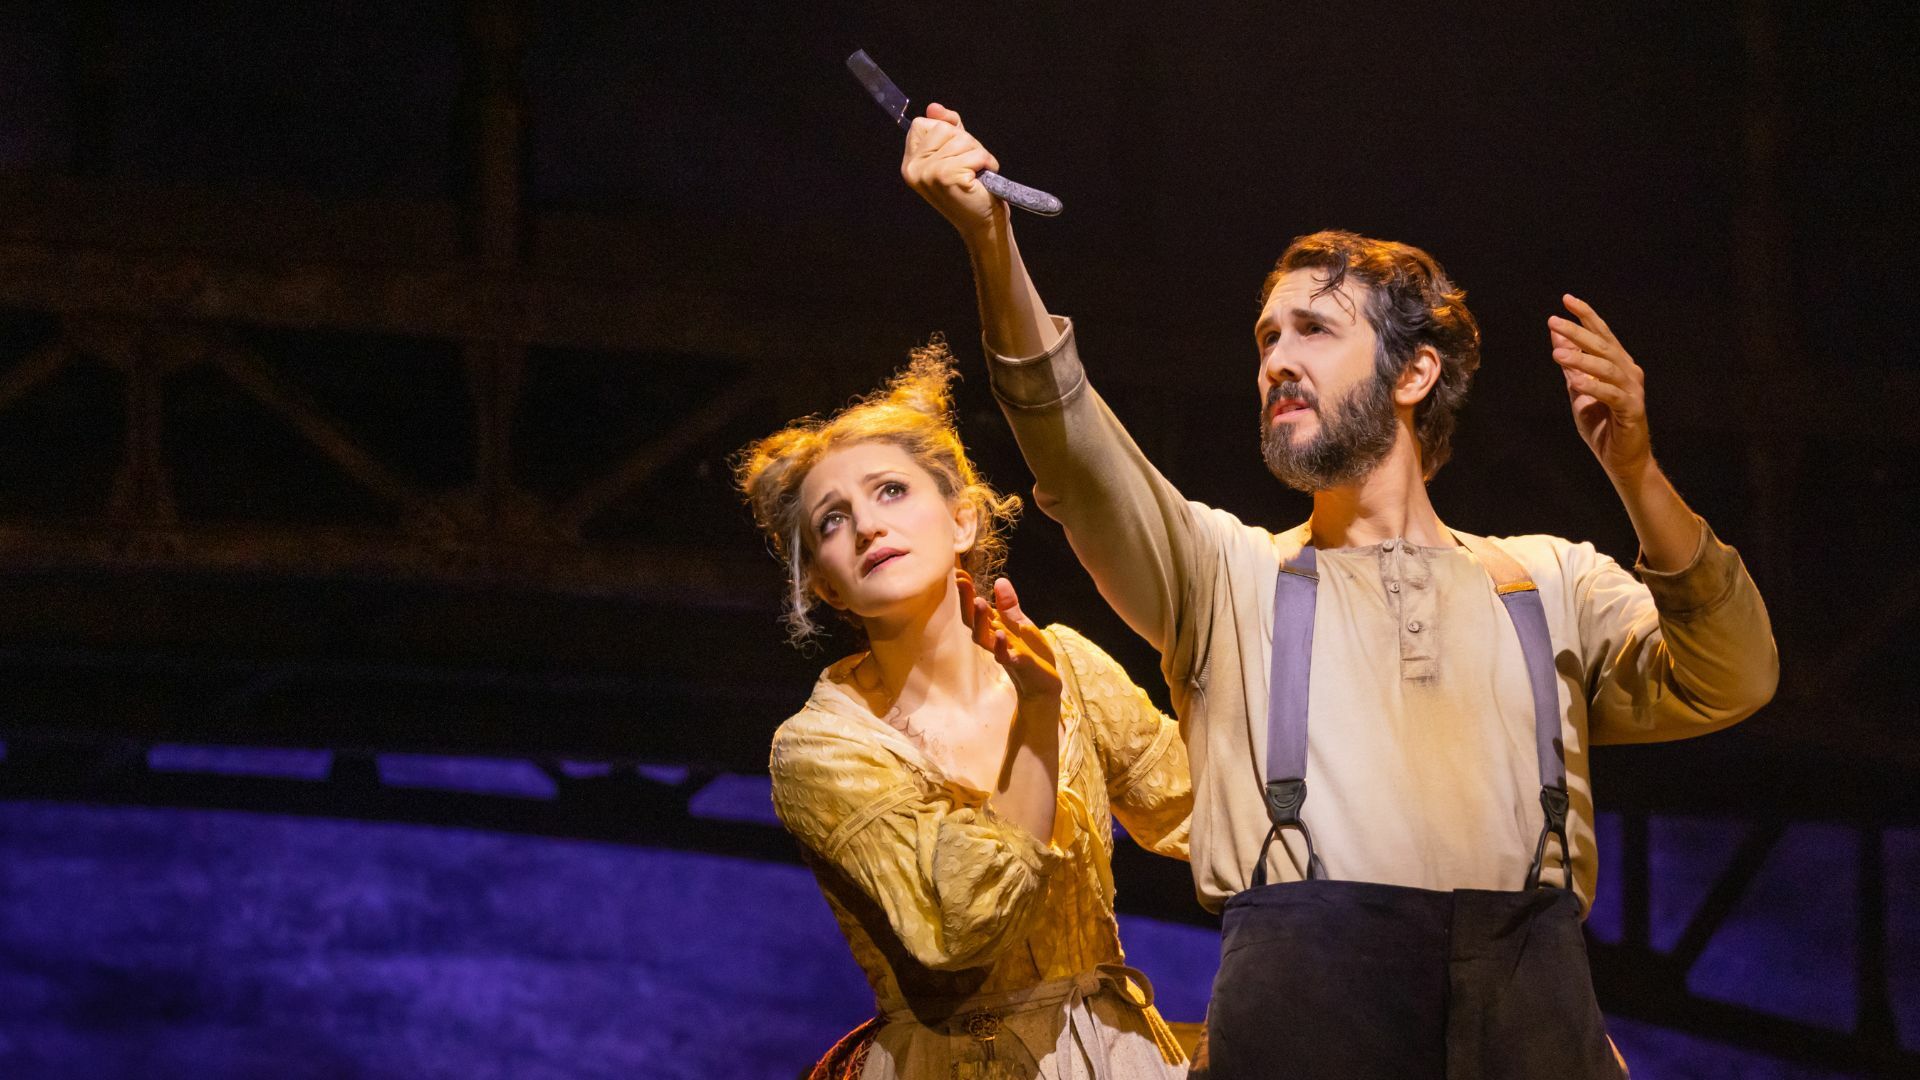 Josh Groban and Annaleigh Ashford sing together in 